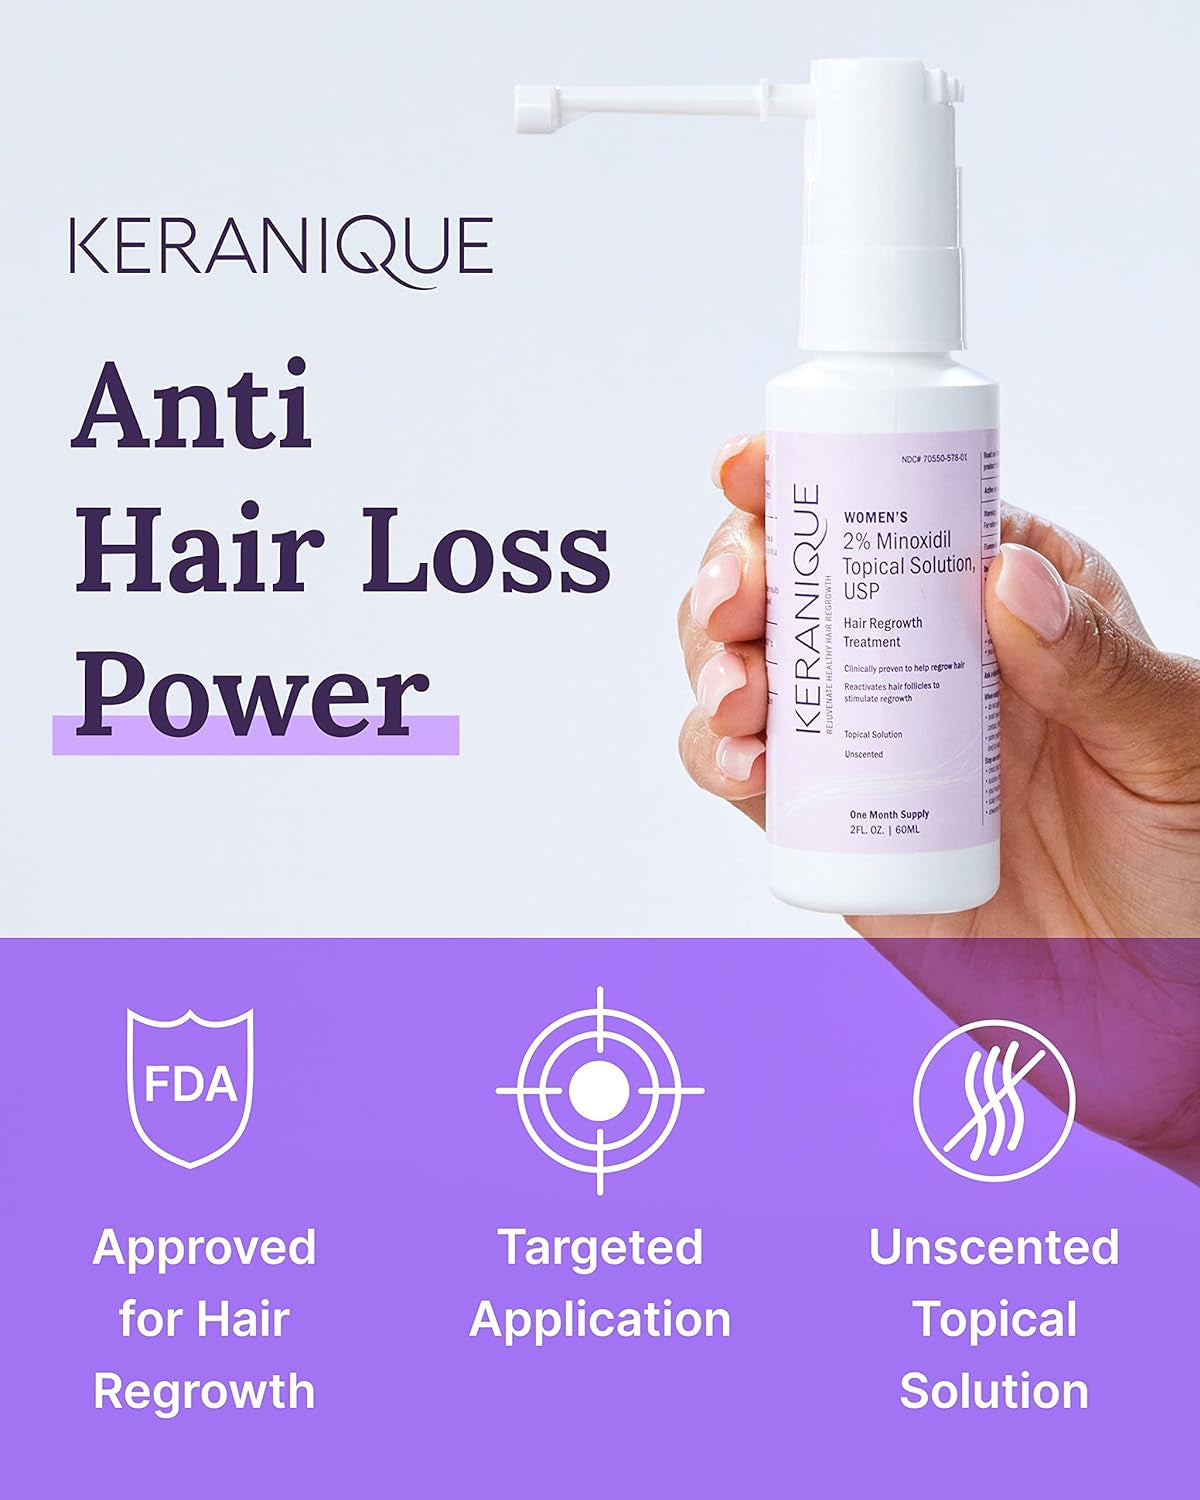 "Keranique Hair Regrowth Treatment for Women - Boost Hair Growth & Thickness - Targeted Scalp Solution for Hair Loss & Thinning - Easy Precision Spray Application - 2 Fl Oz"